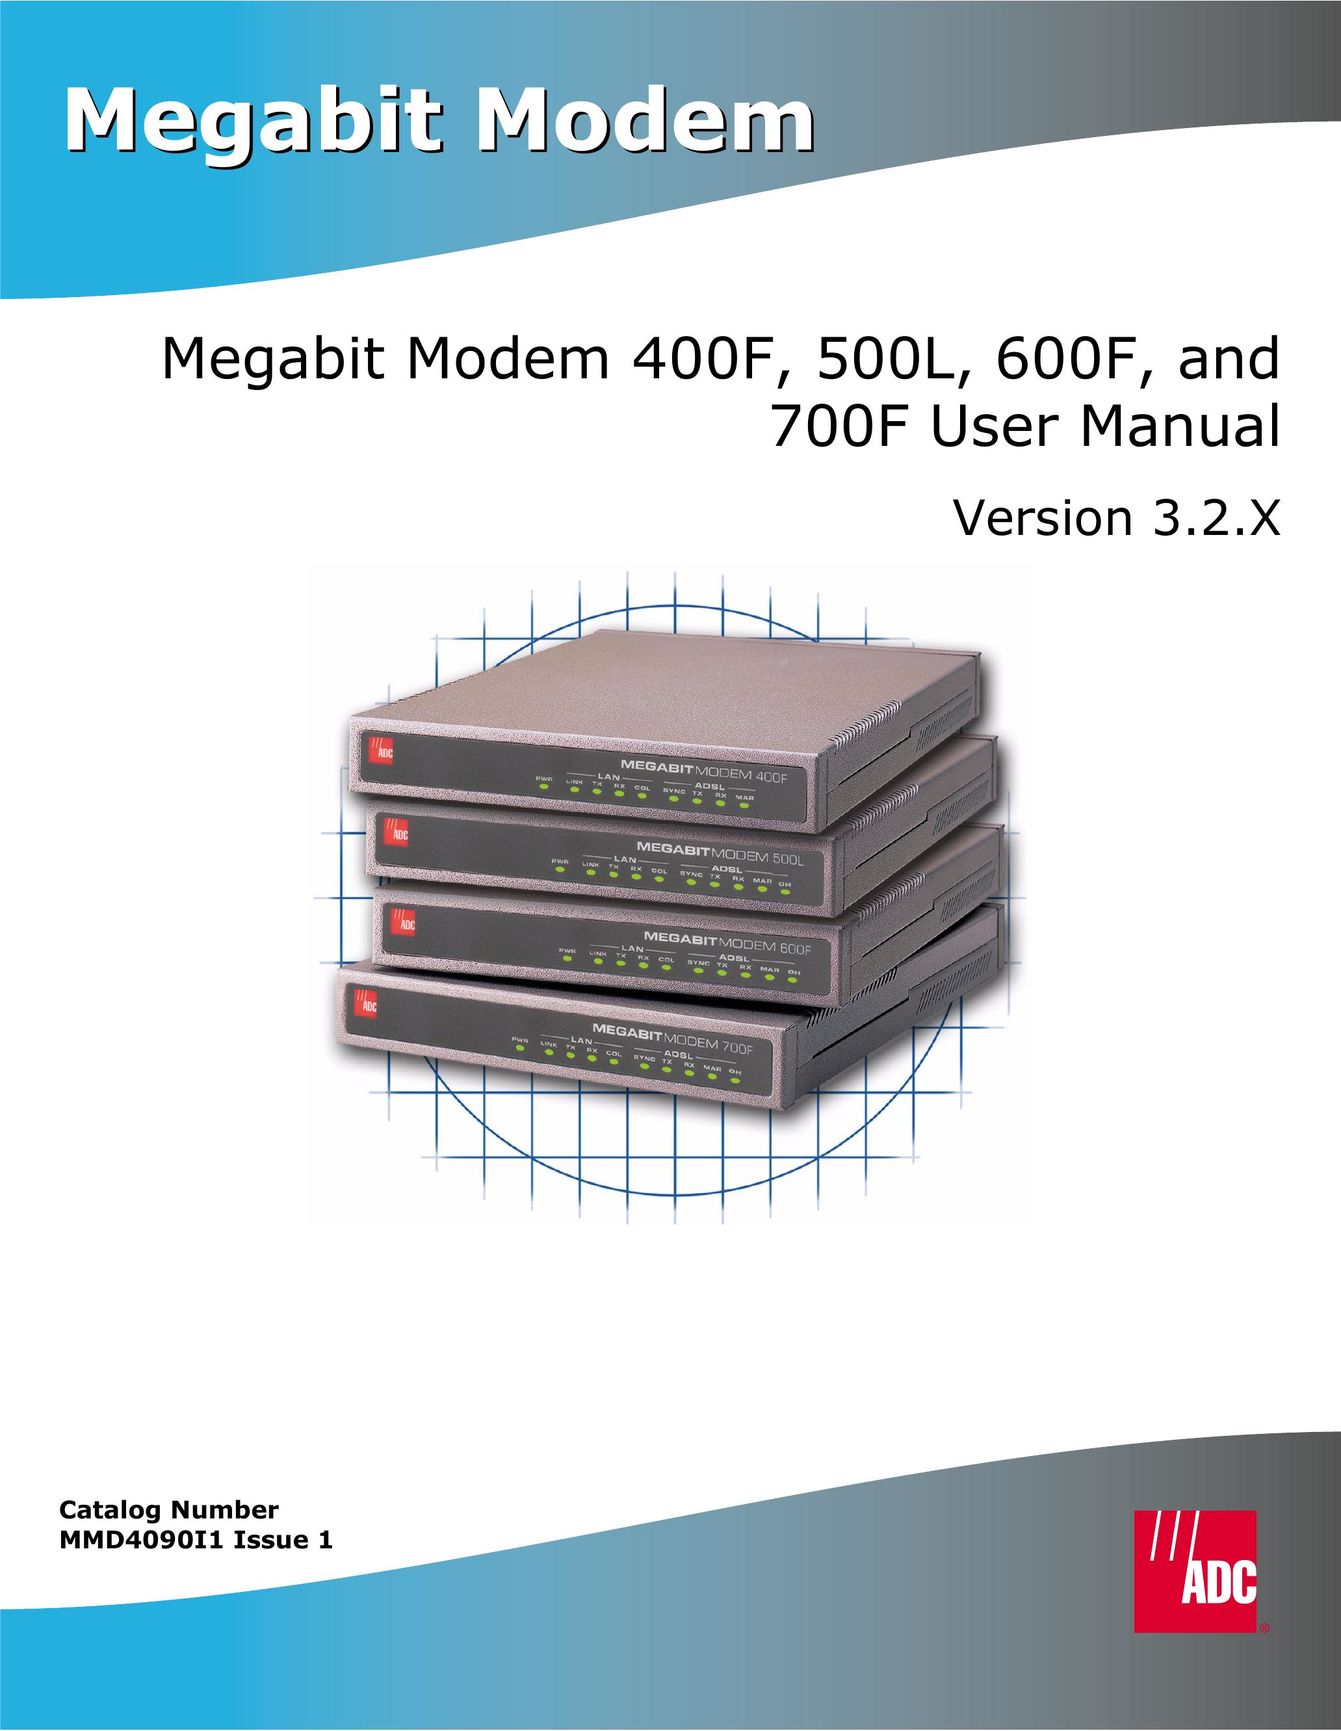 ADC 600F Network Card User Manual